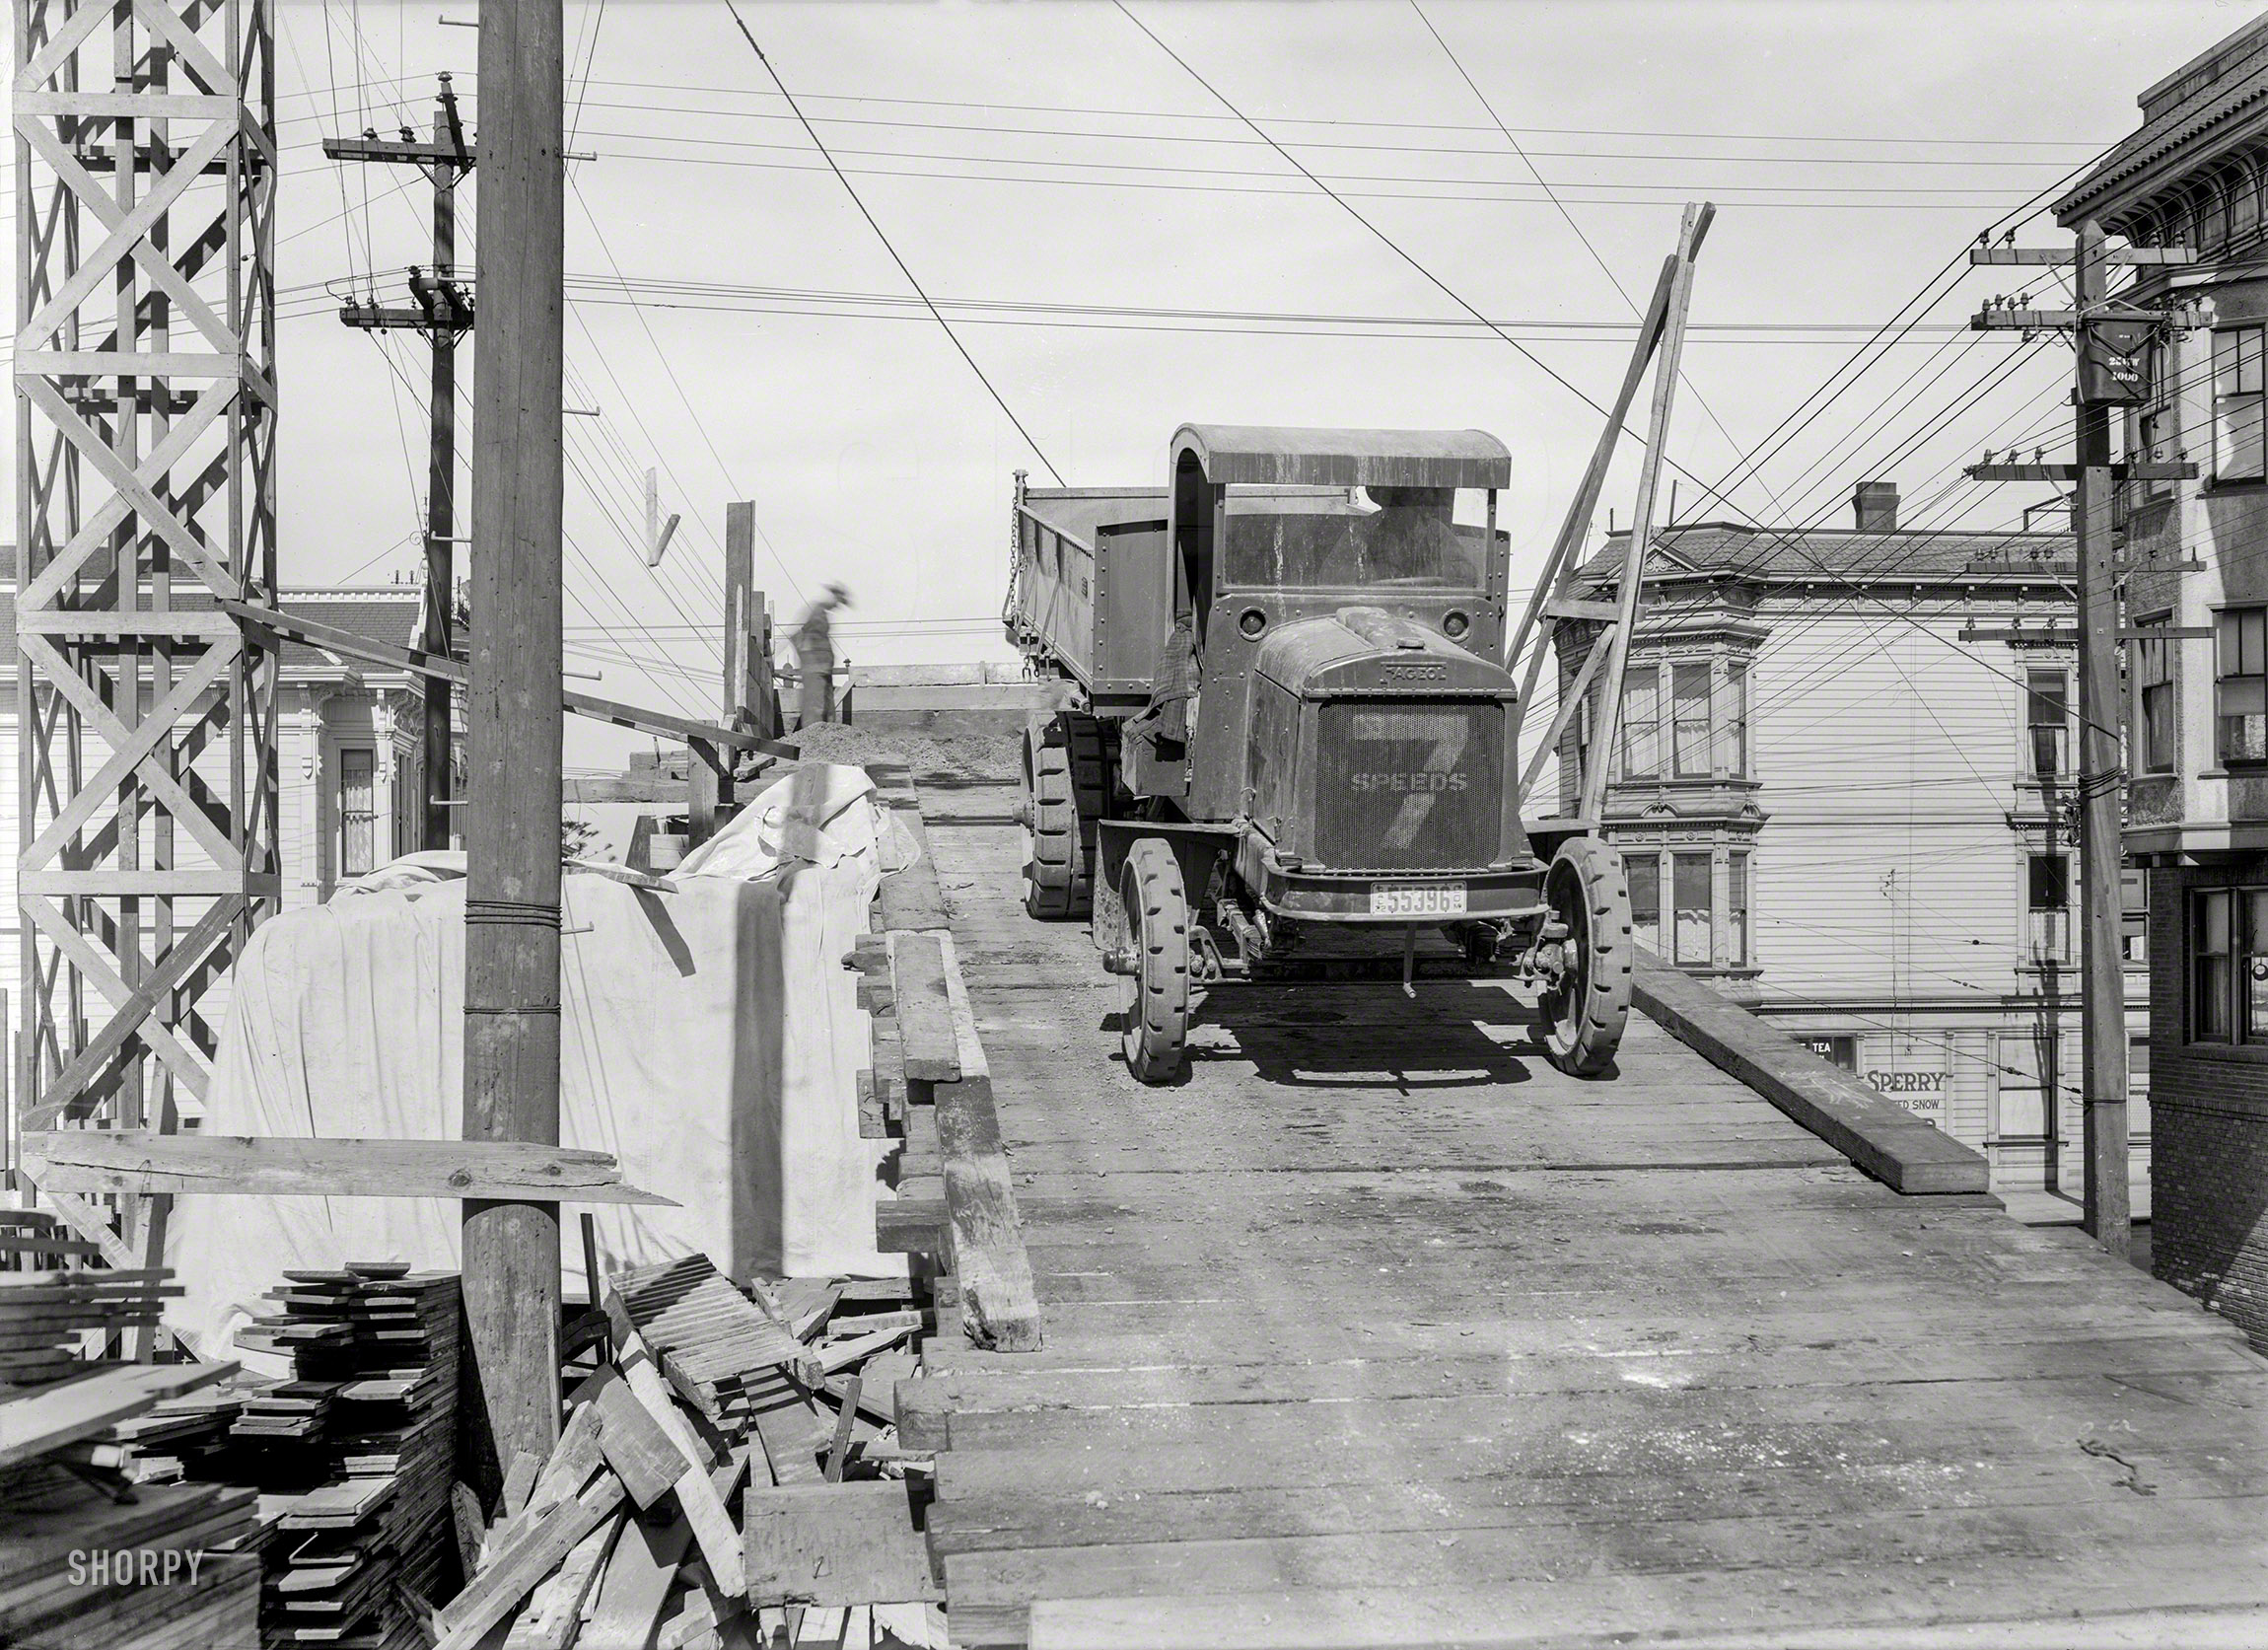 San Francisco, 1922. "Fageol truck on construction ramp." Flintstones-era dumper with solid rubber tires. 5x7 glass negative by Christopher Helin. View full size.